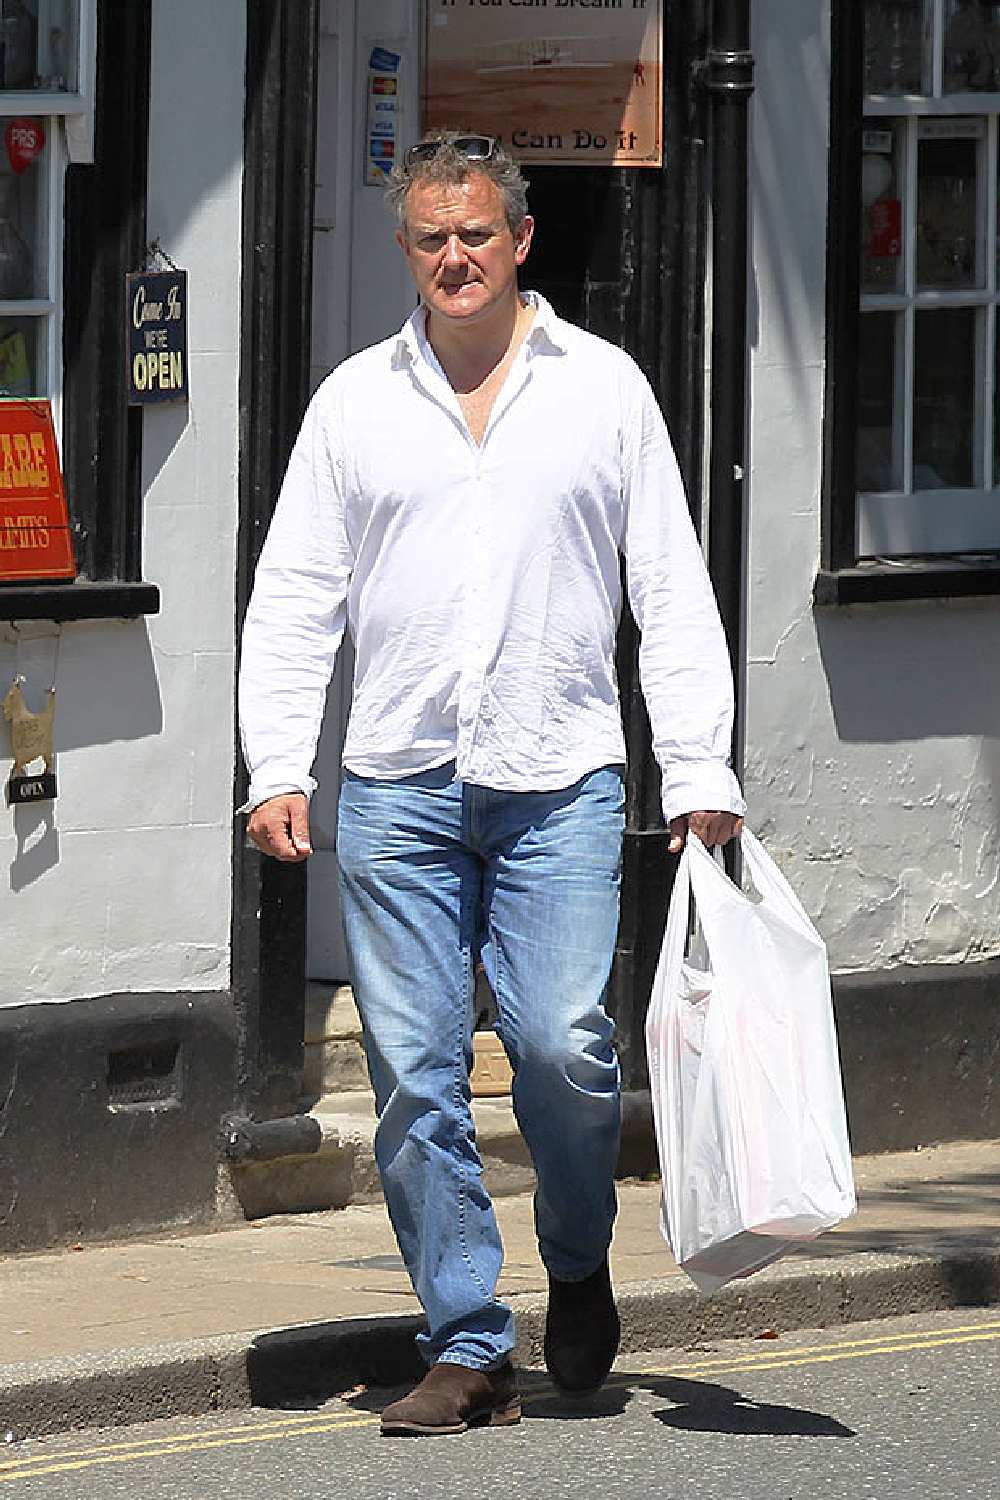 Why has Hugh Bonneville lost so much weight?